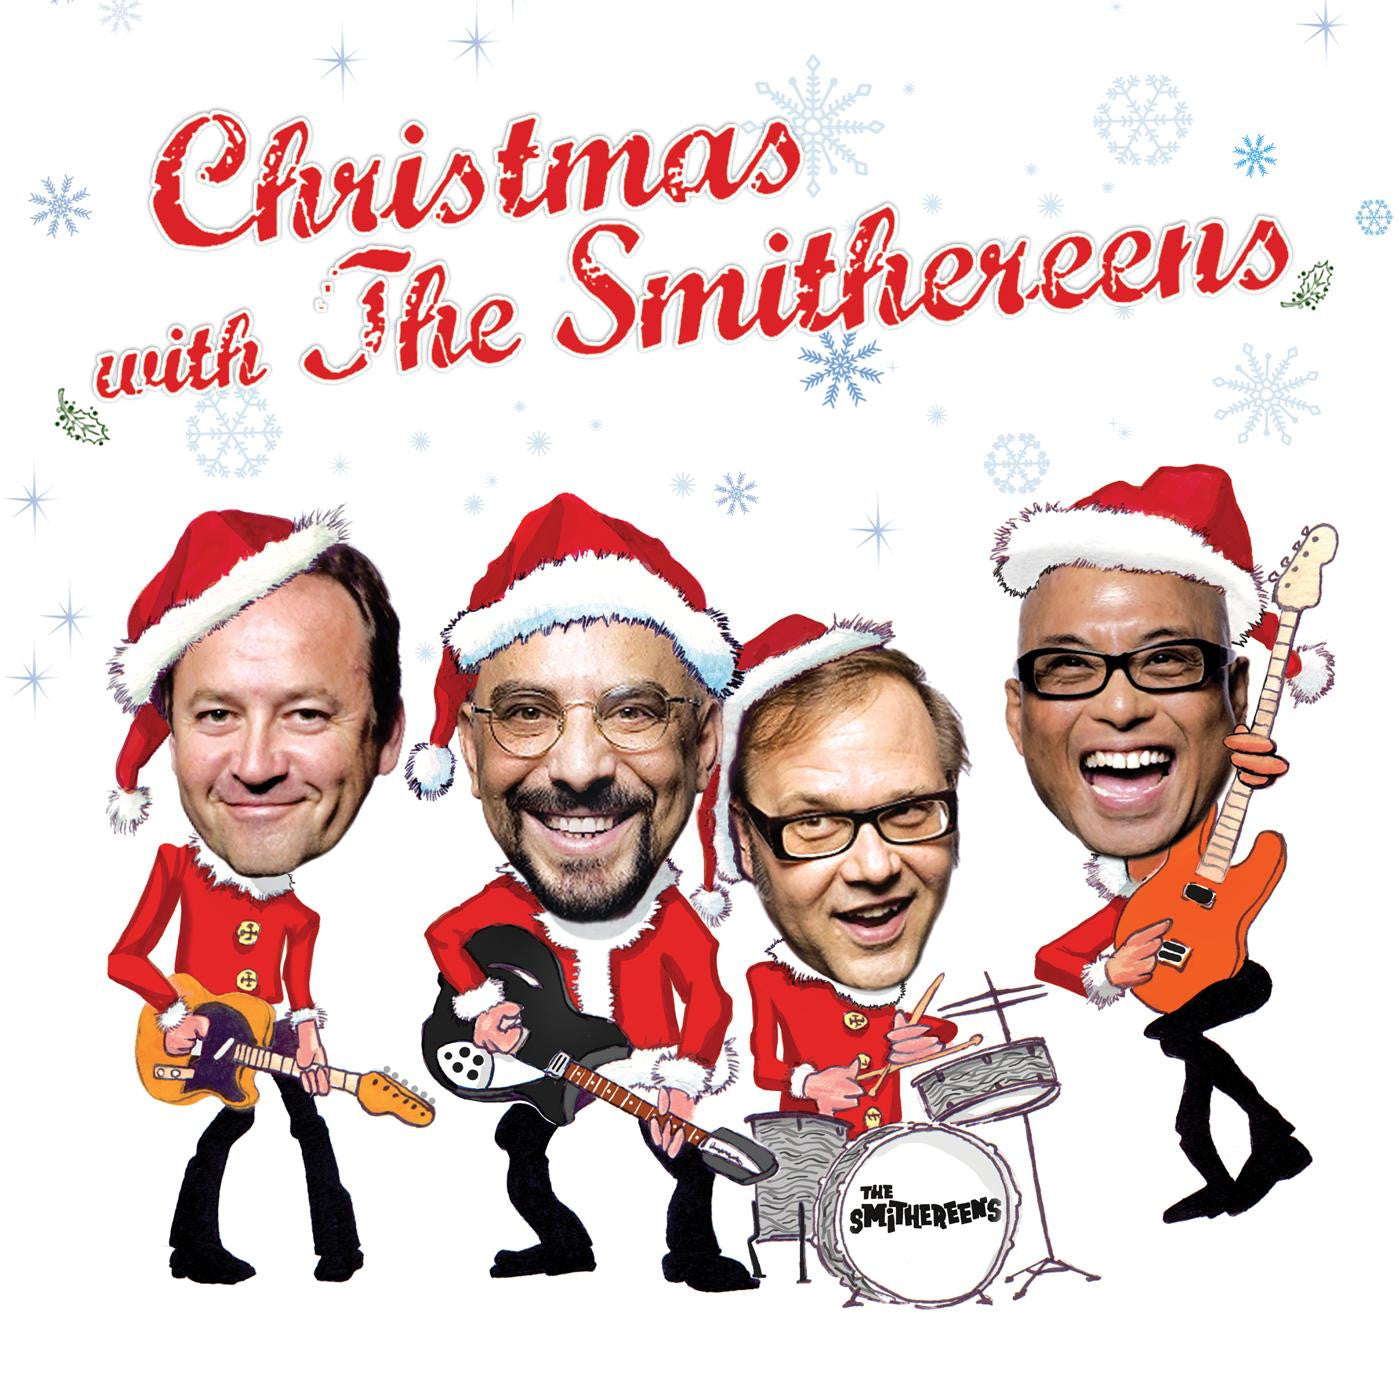 Smithereens - Christmas With the Smithereens (Vinyl LP)